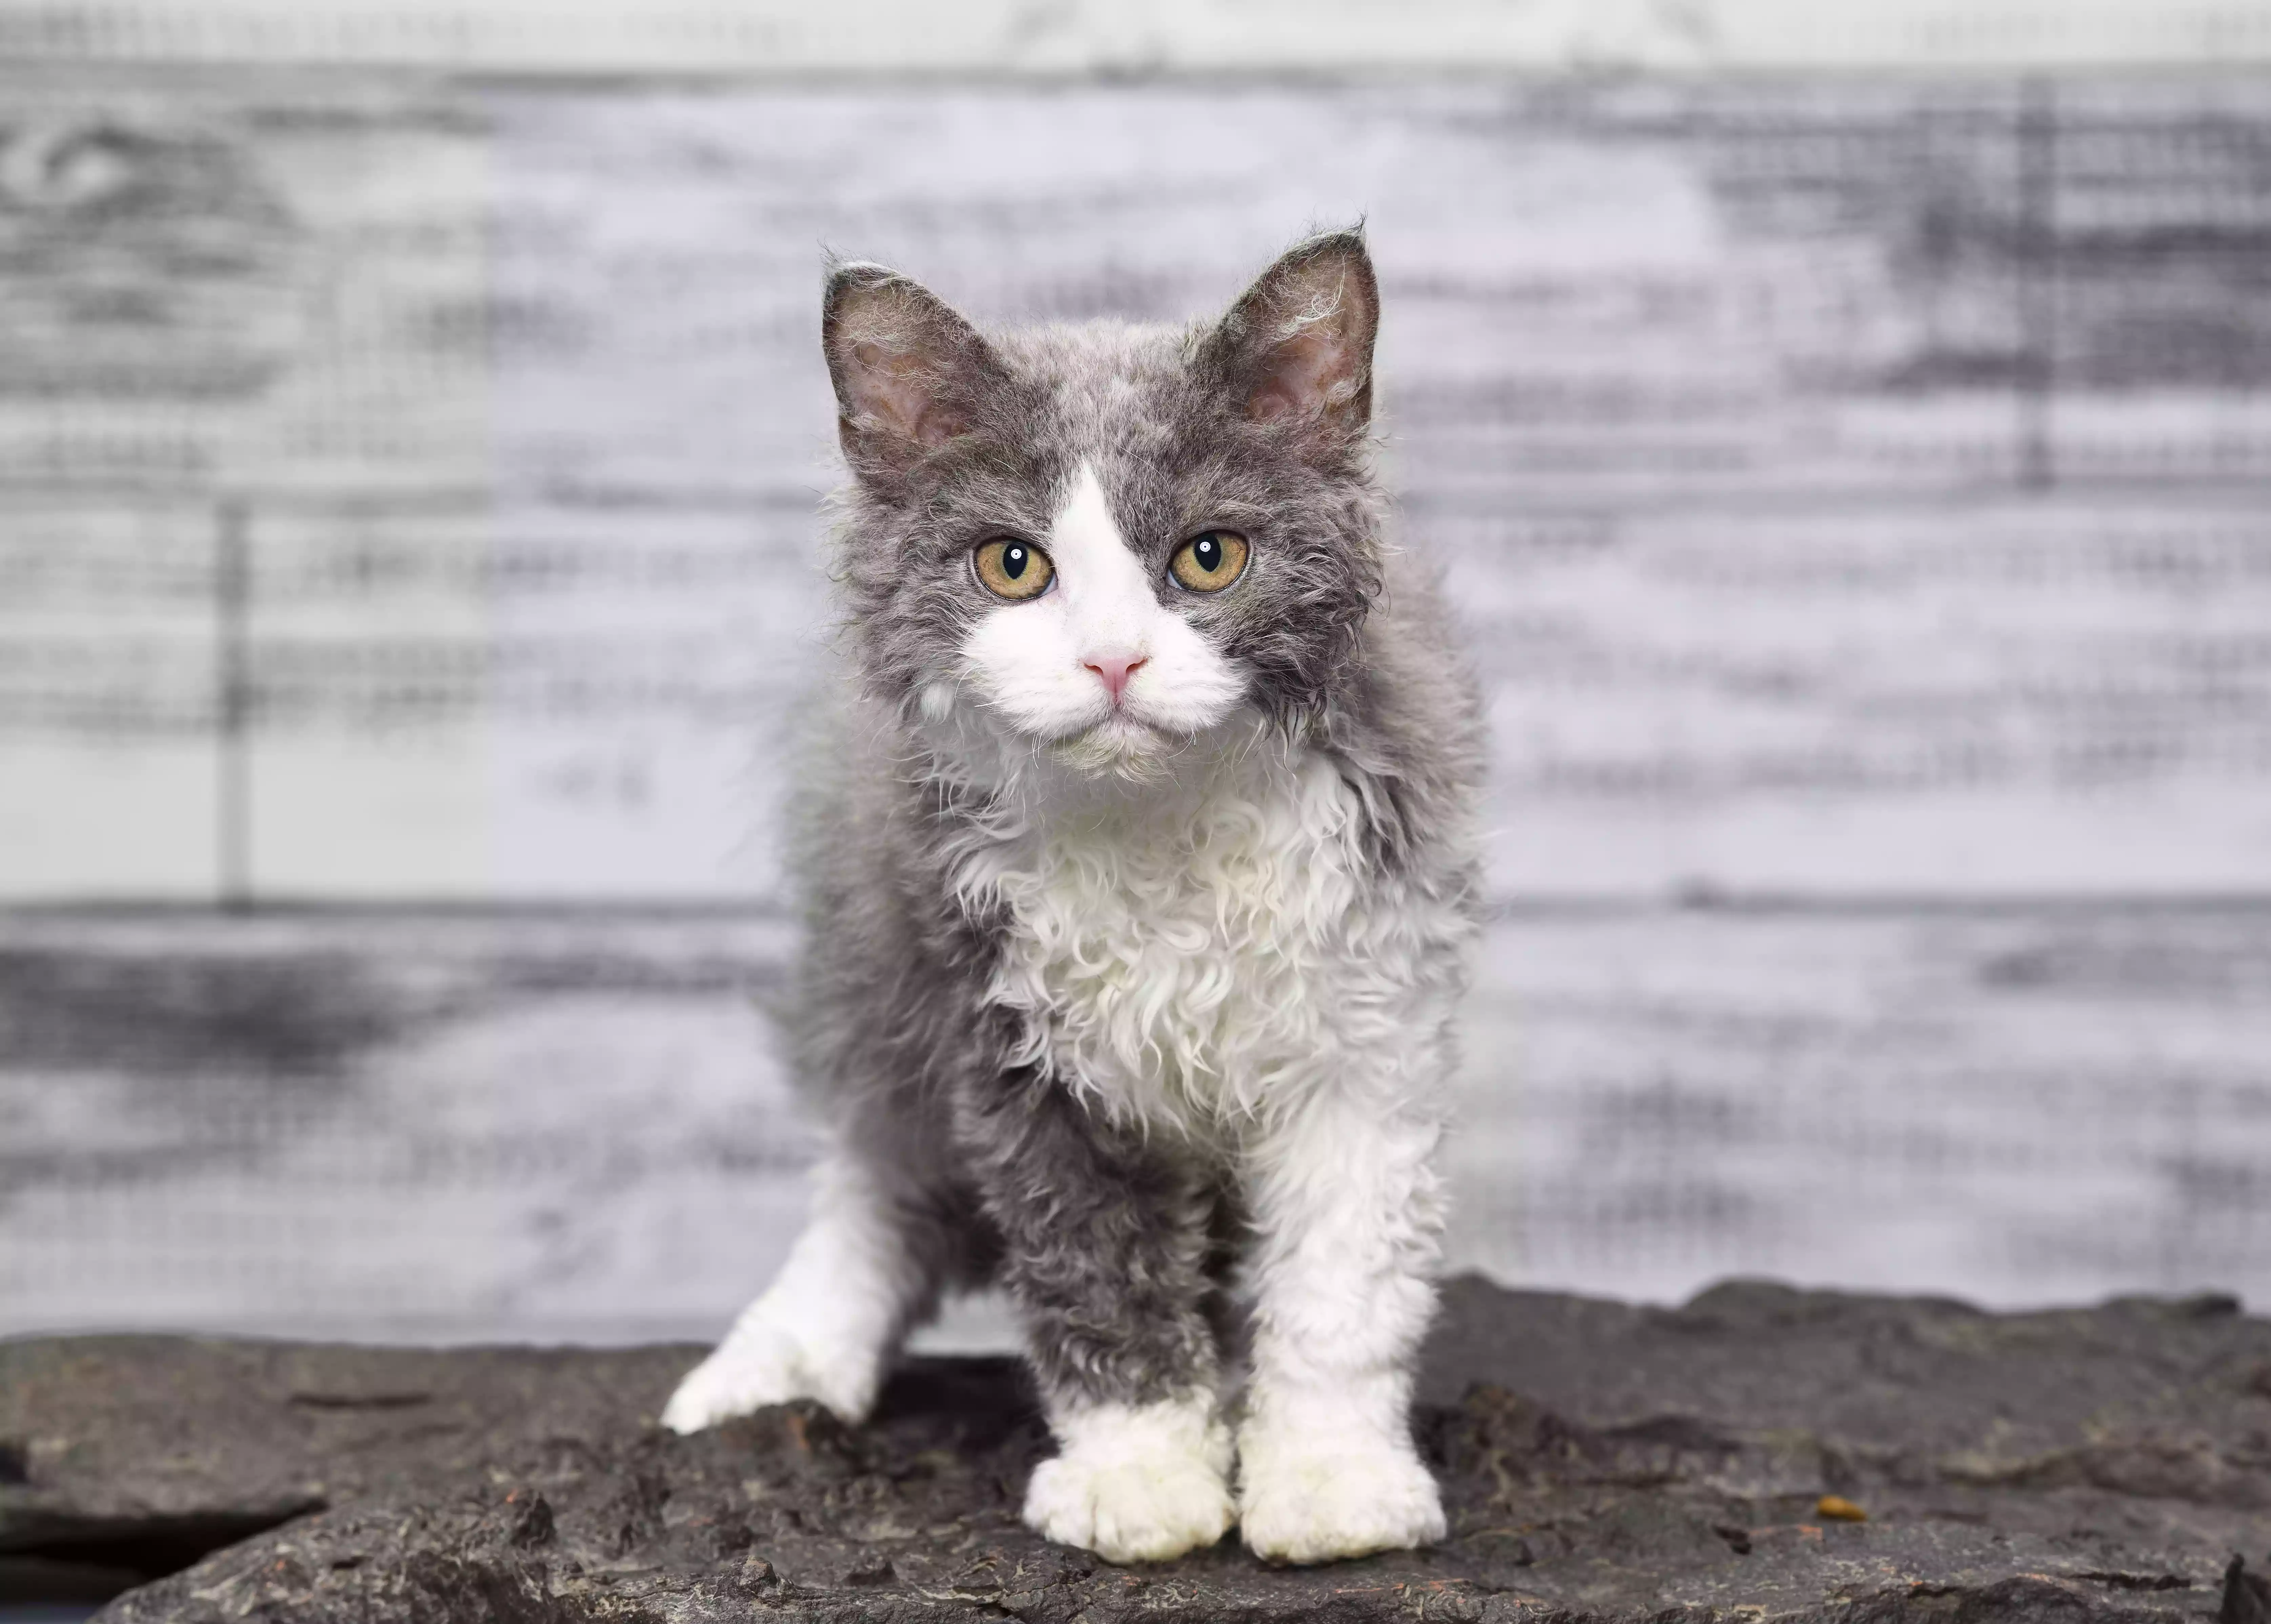 A white and gray Selkirk Rex cat standing on dark gray rocky ground against a white painted wooden wall